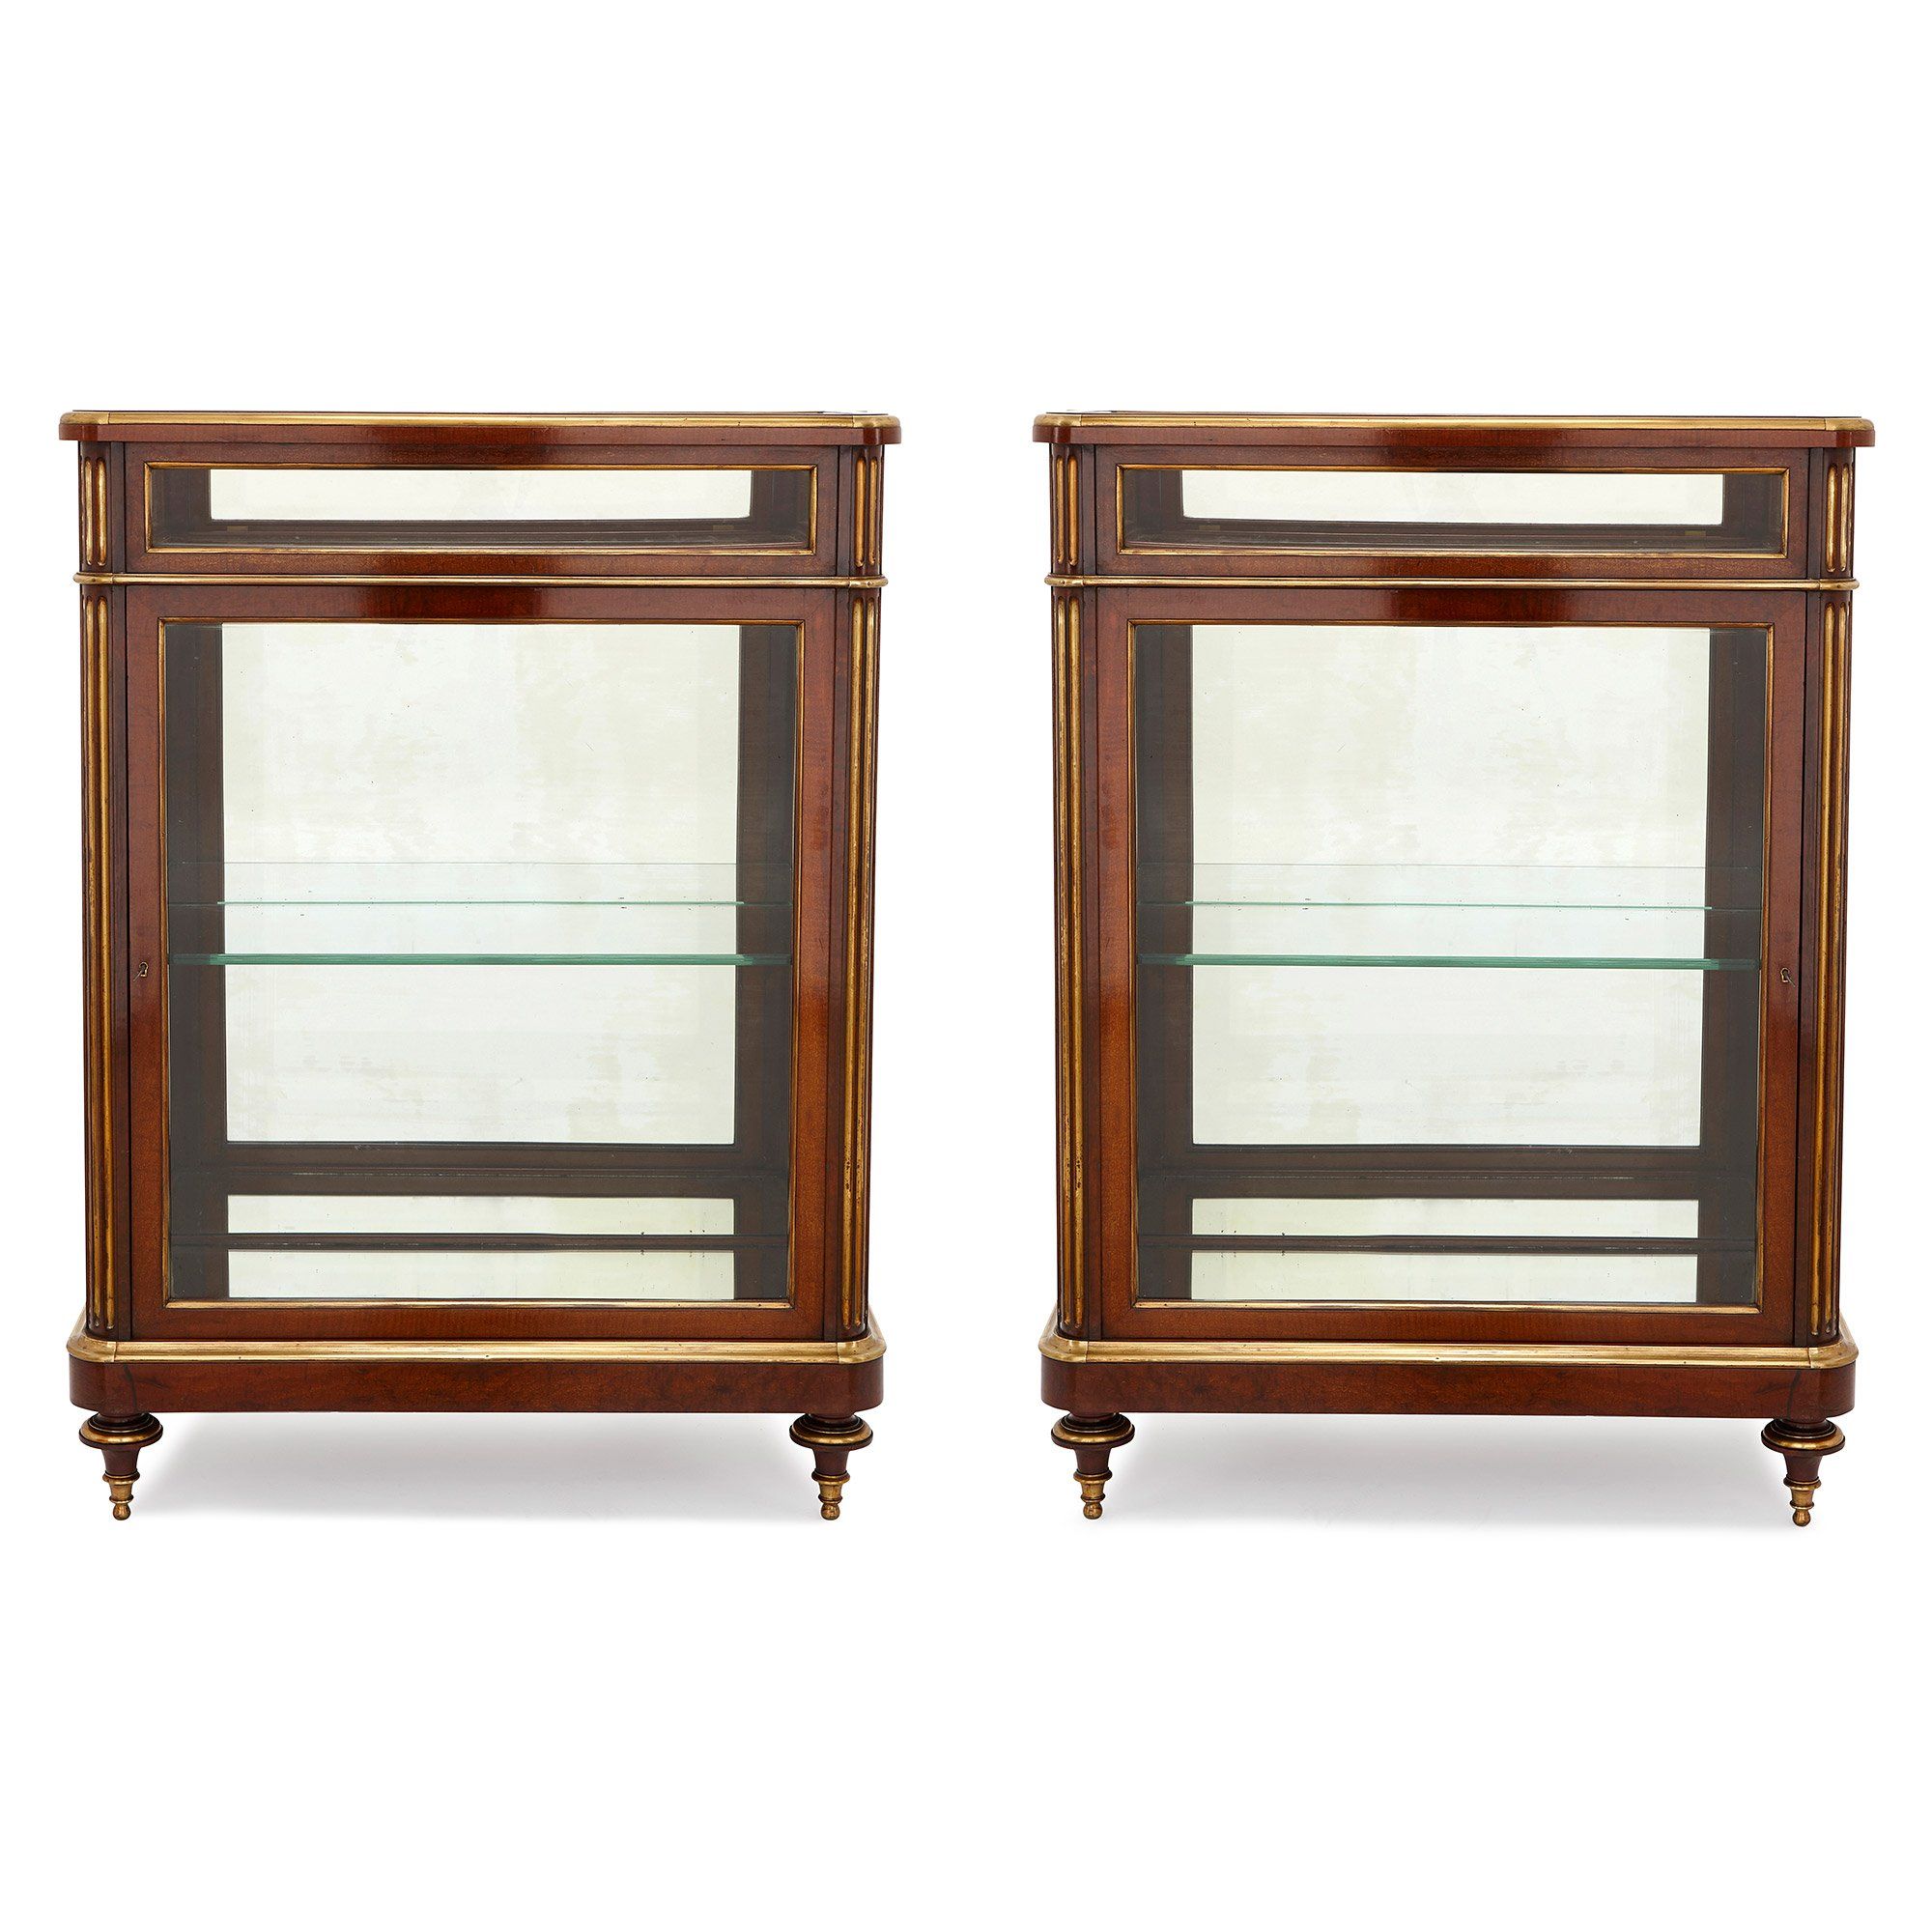 Pair Of Antique French Mahogany And Brass Vitrine Cabinets